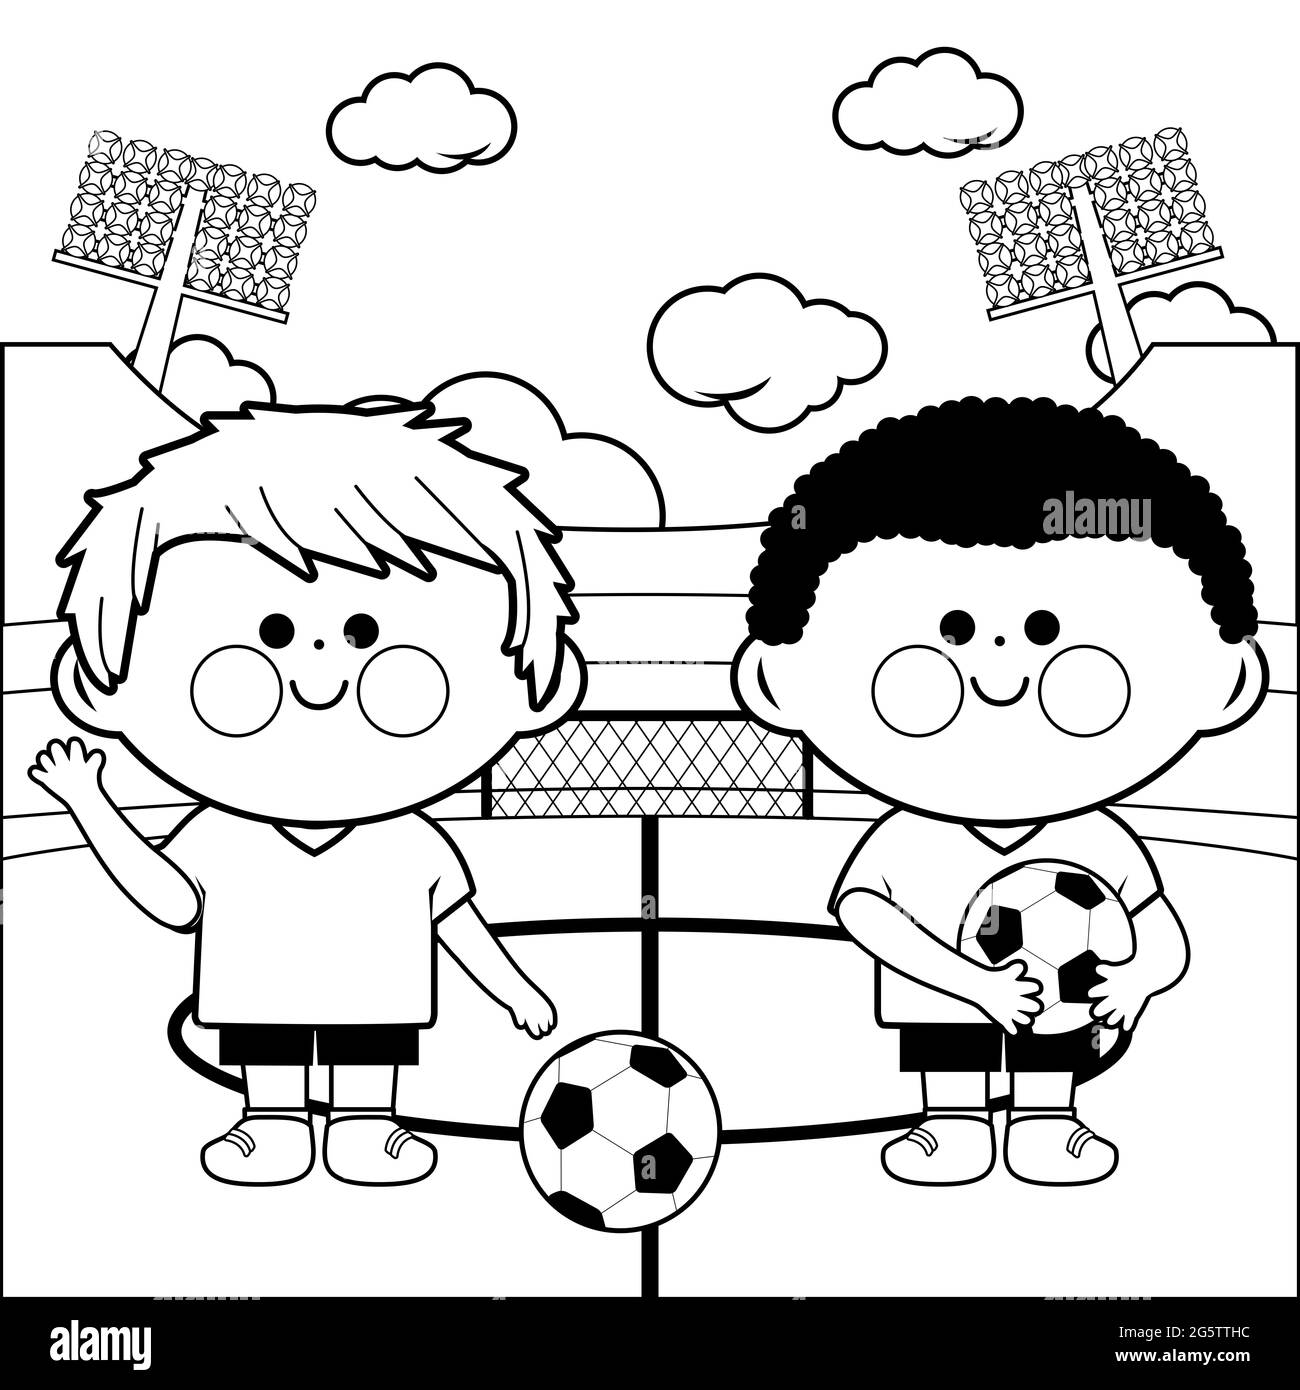 kids playing tag coloring pages